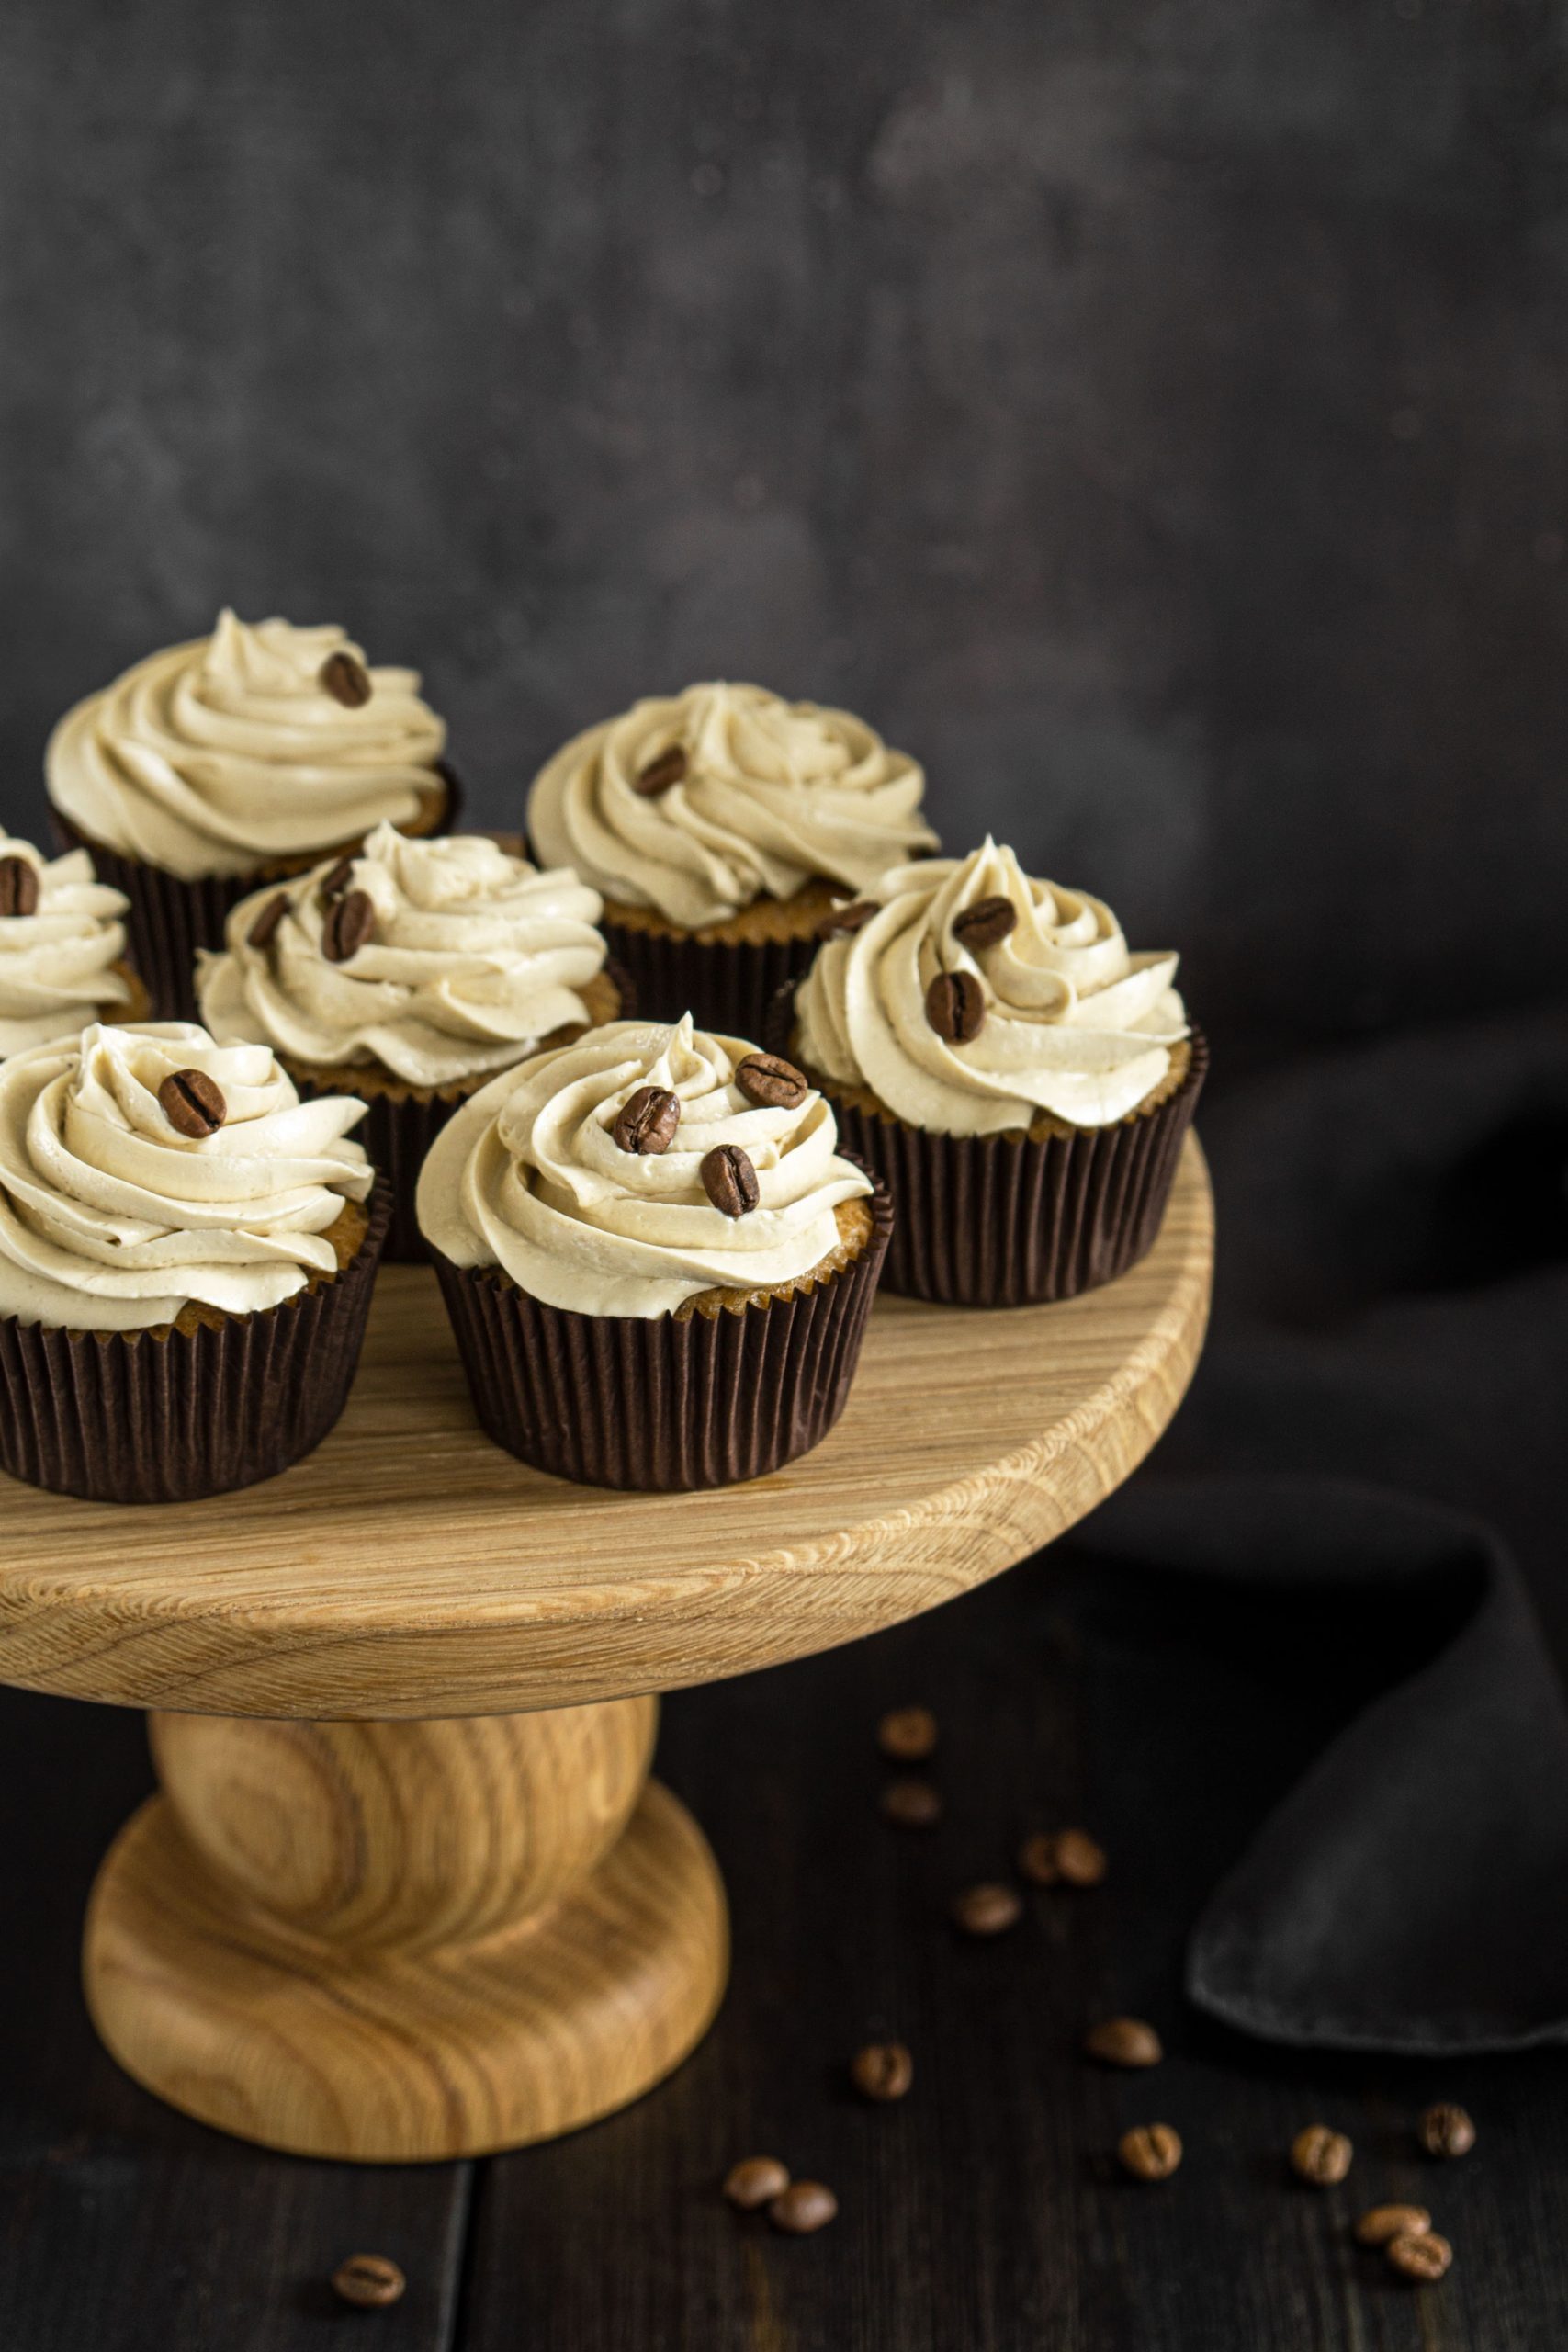 Coffee cupcakes decorated with buttercream and served on a wooden cake stand